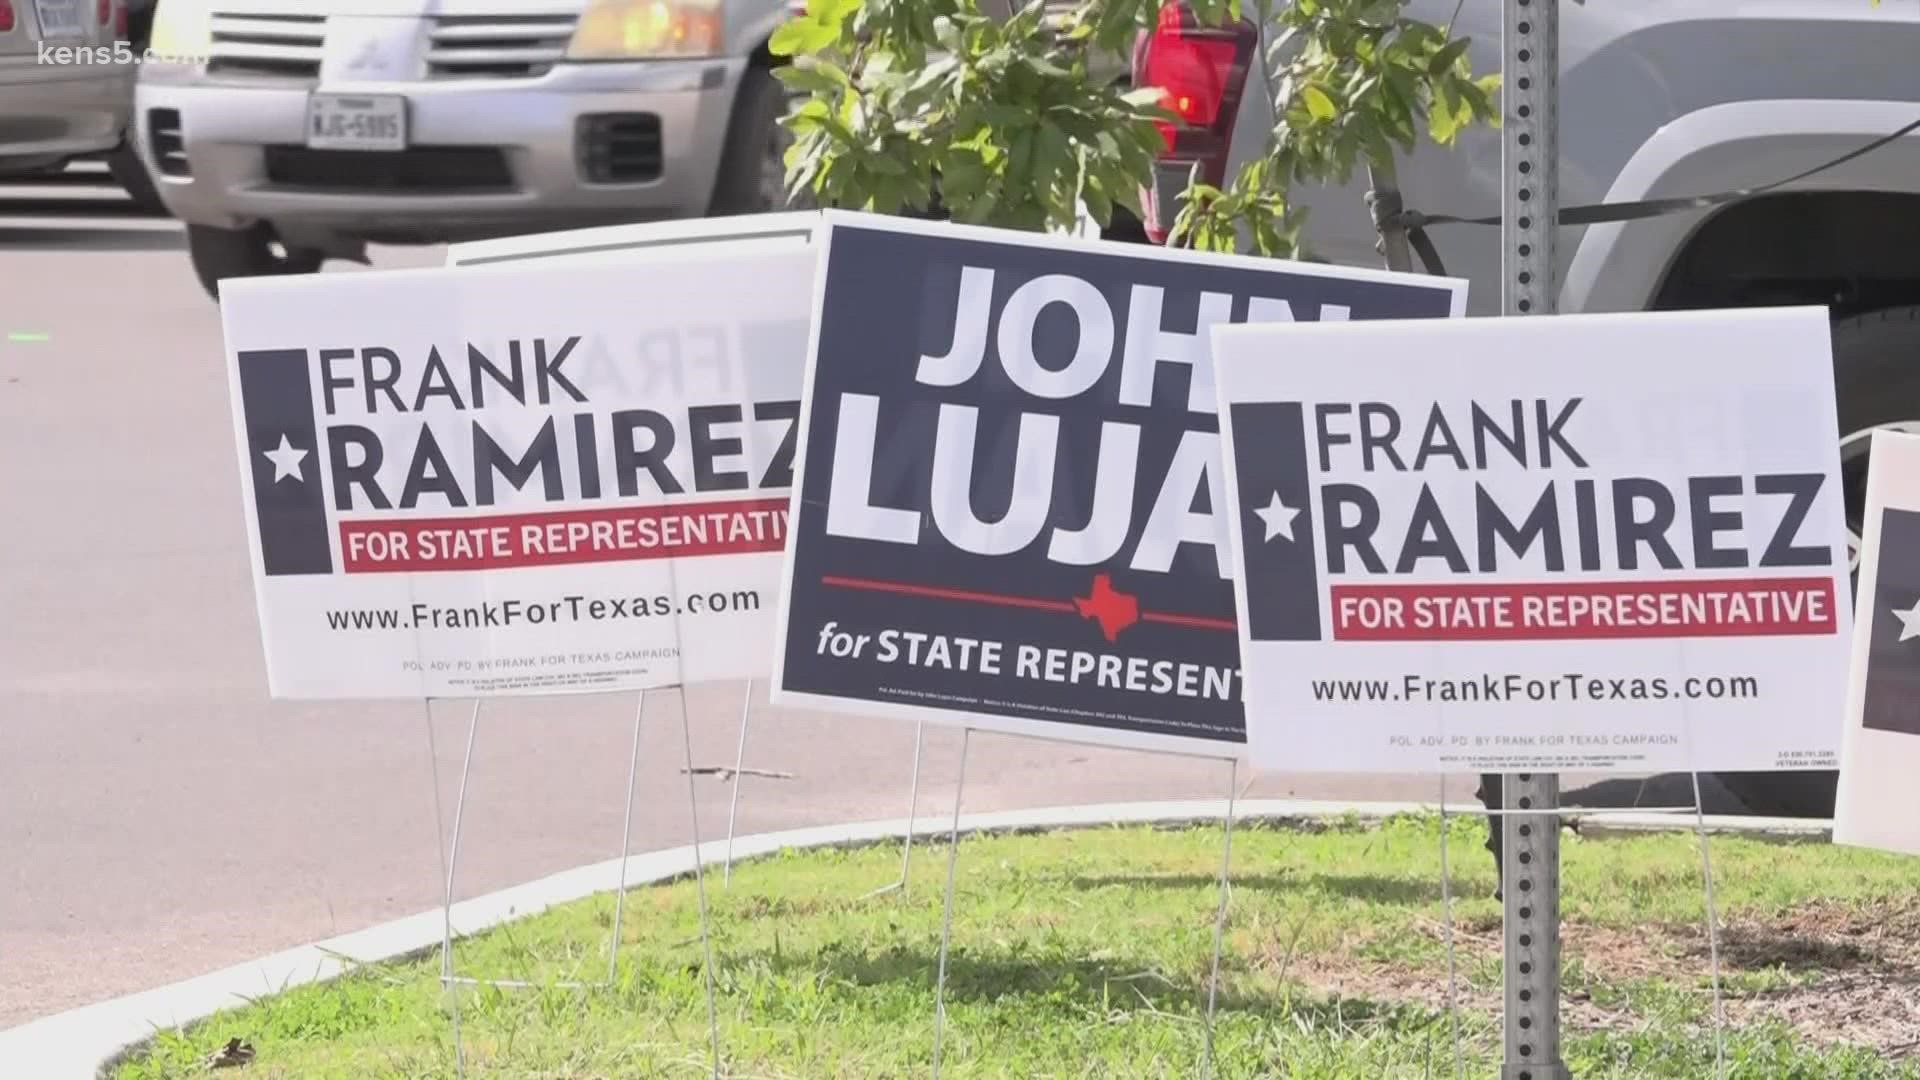 John Lujan and Frank Ramirez are vying to fill the open seat representing a large portion of south and east Bexar County.